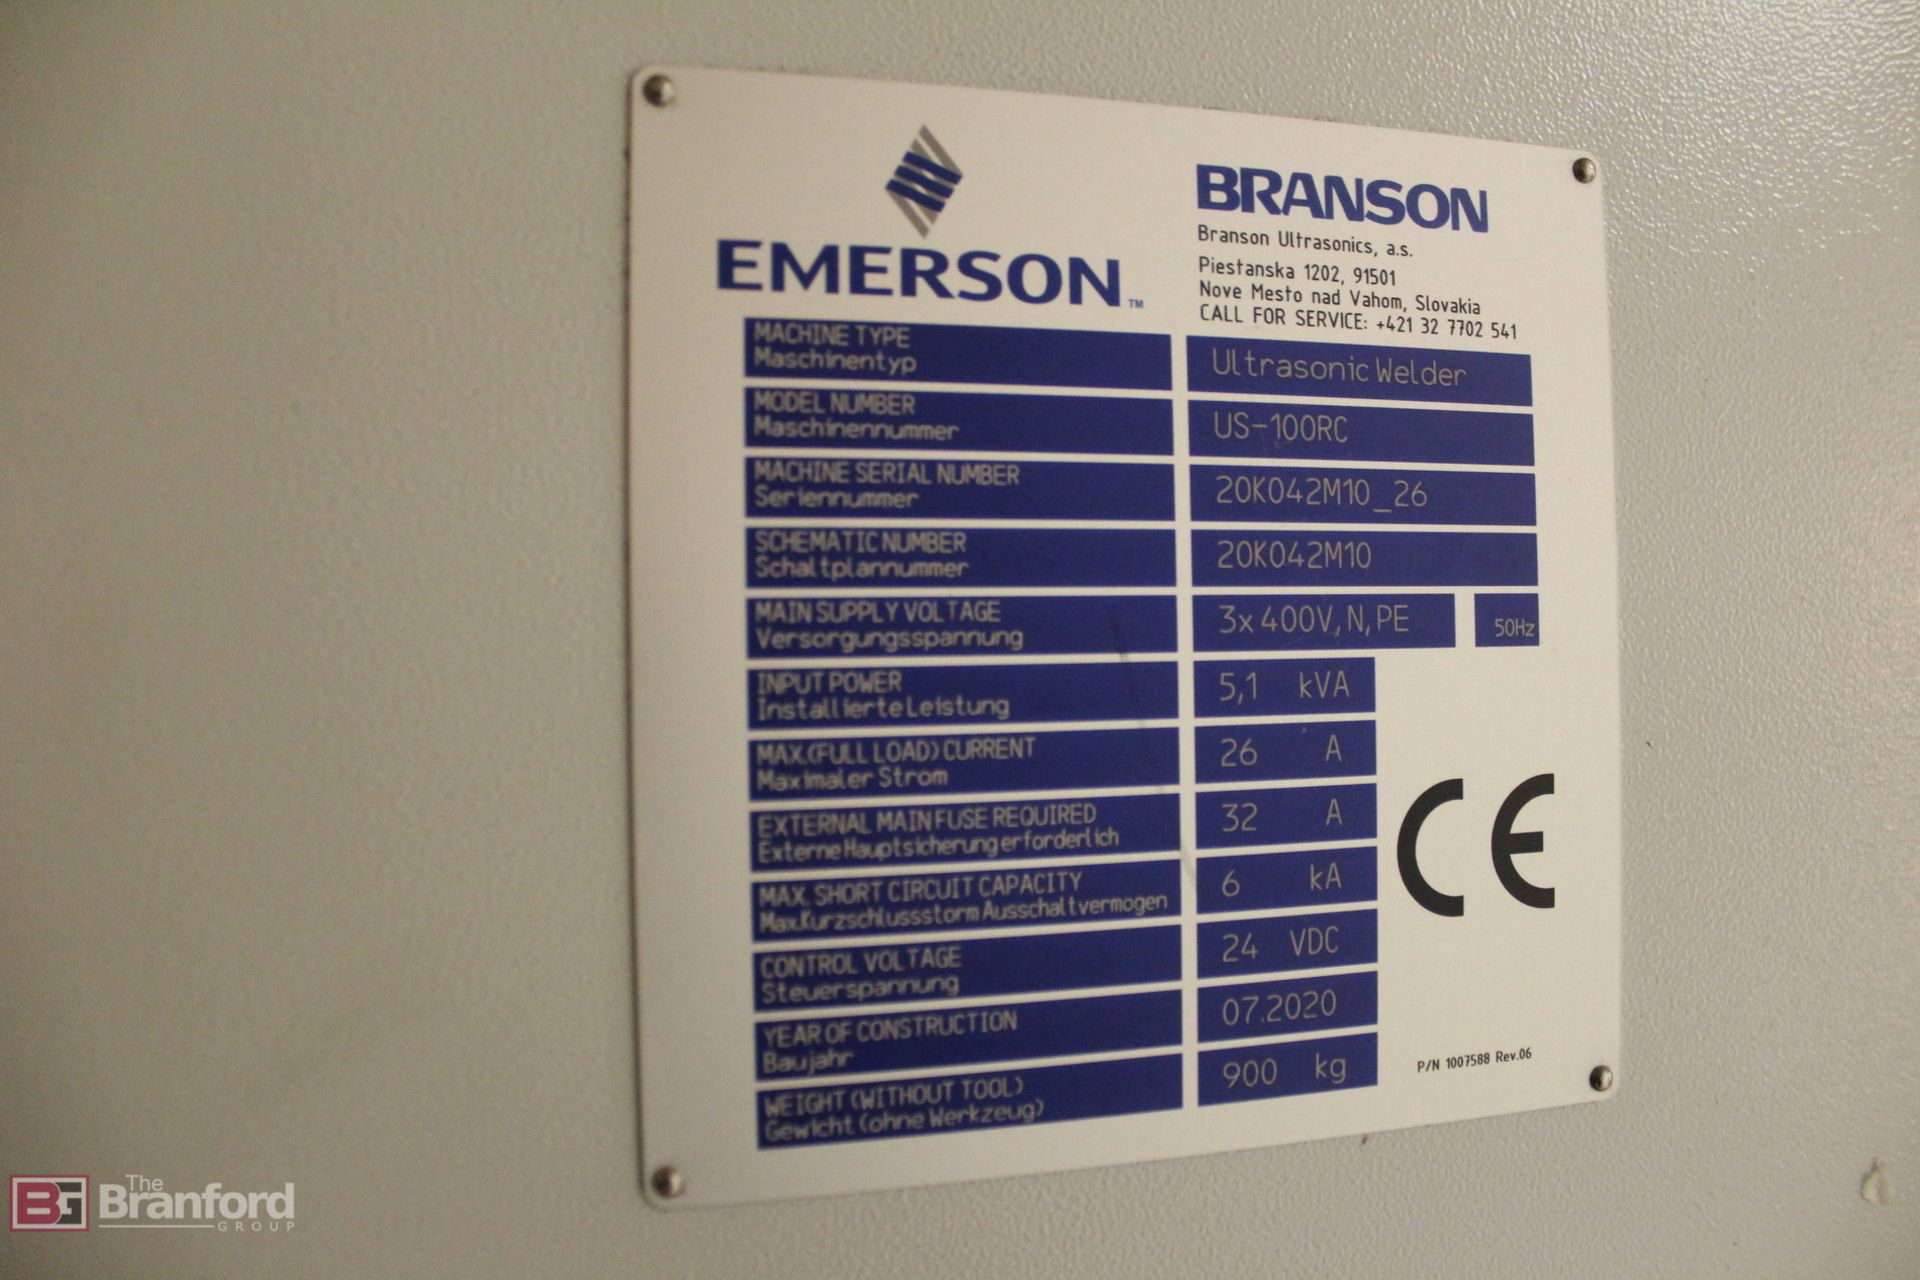 Emerson Branson US-100RC Ultrasonic Rotary Table Sealer/ Cutter - Image 4 of 4